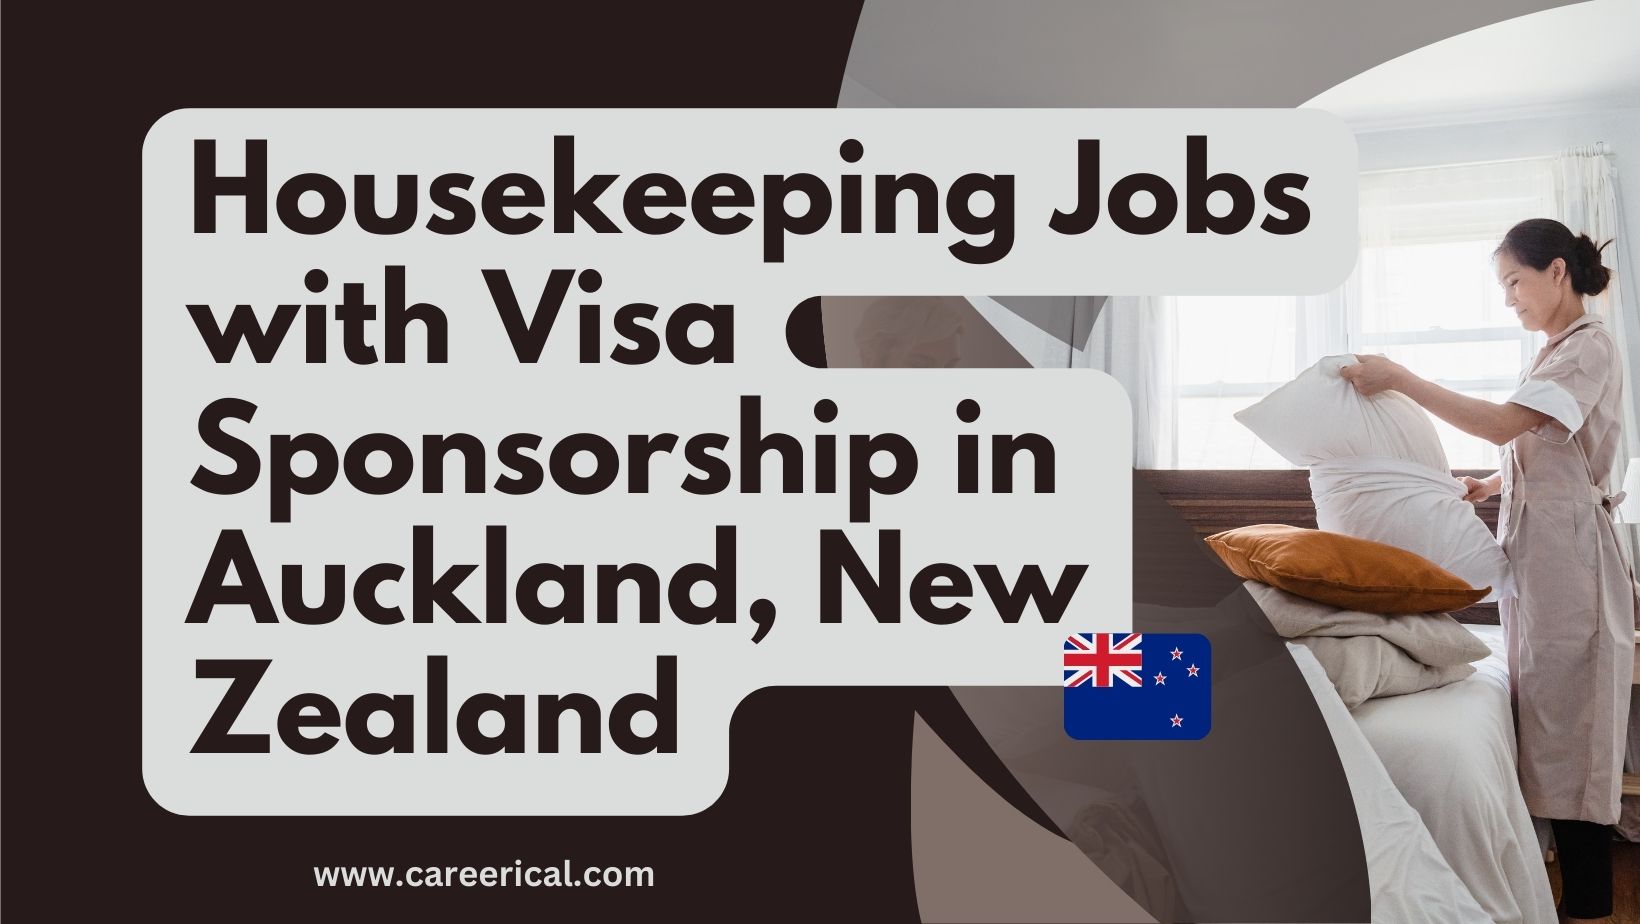 Housekeeping Jobs with Visa Sponsorship in Auckland, New Zealand